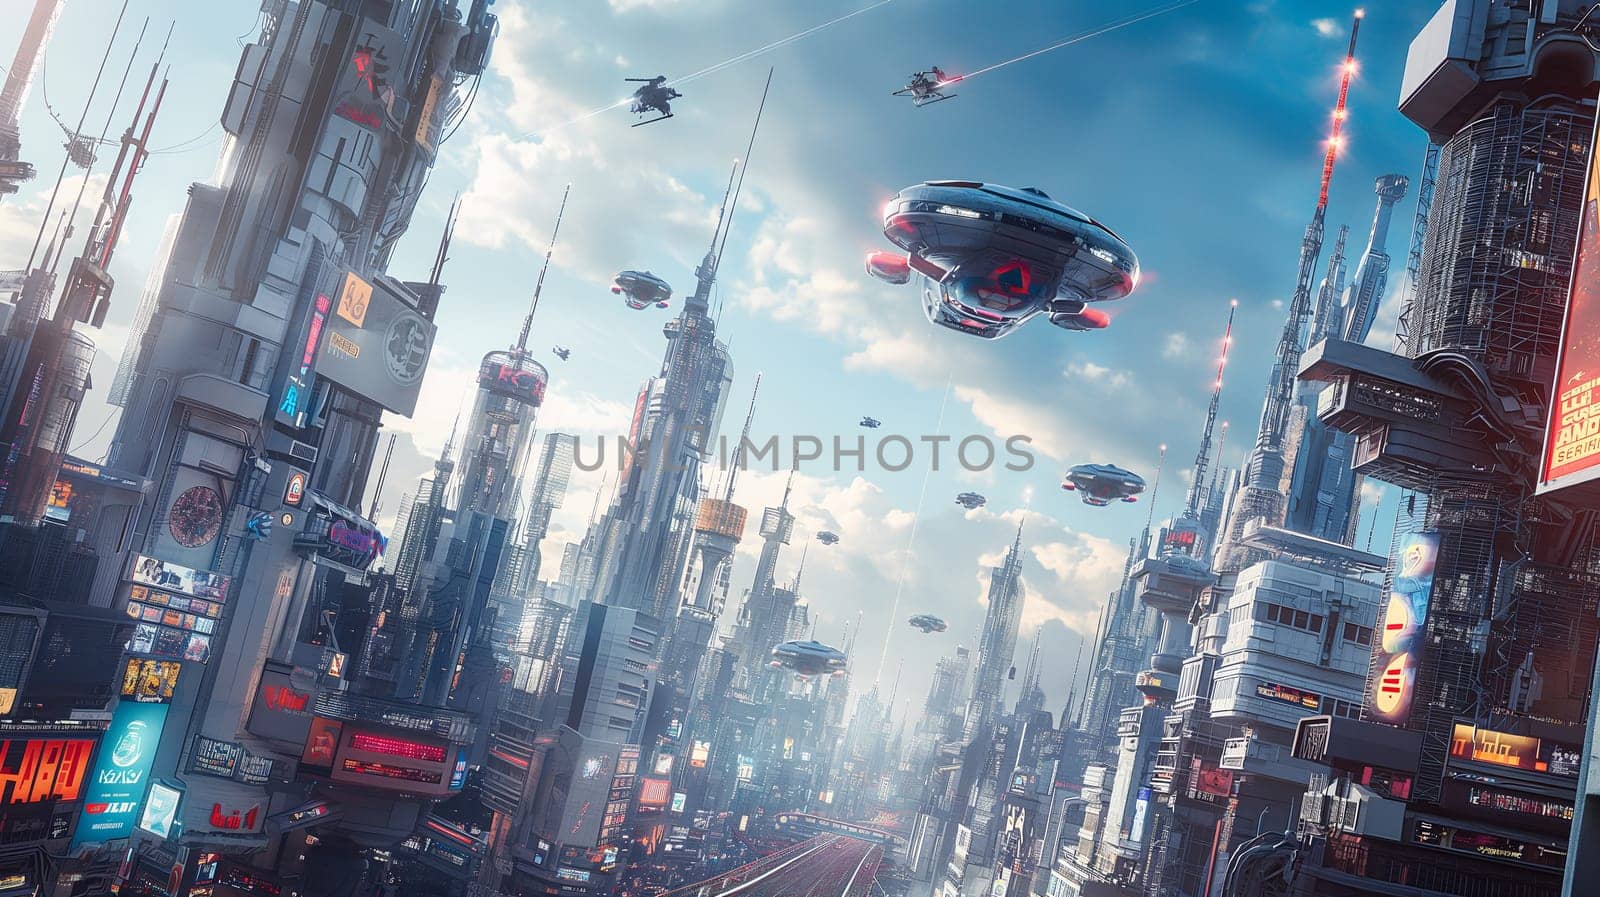 Futuristic Cityscape With Flying Vehicles and Neon Billboards by chrisroll